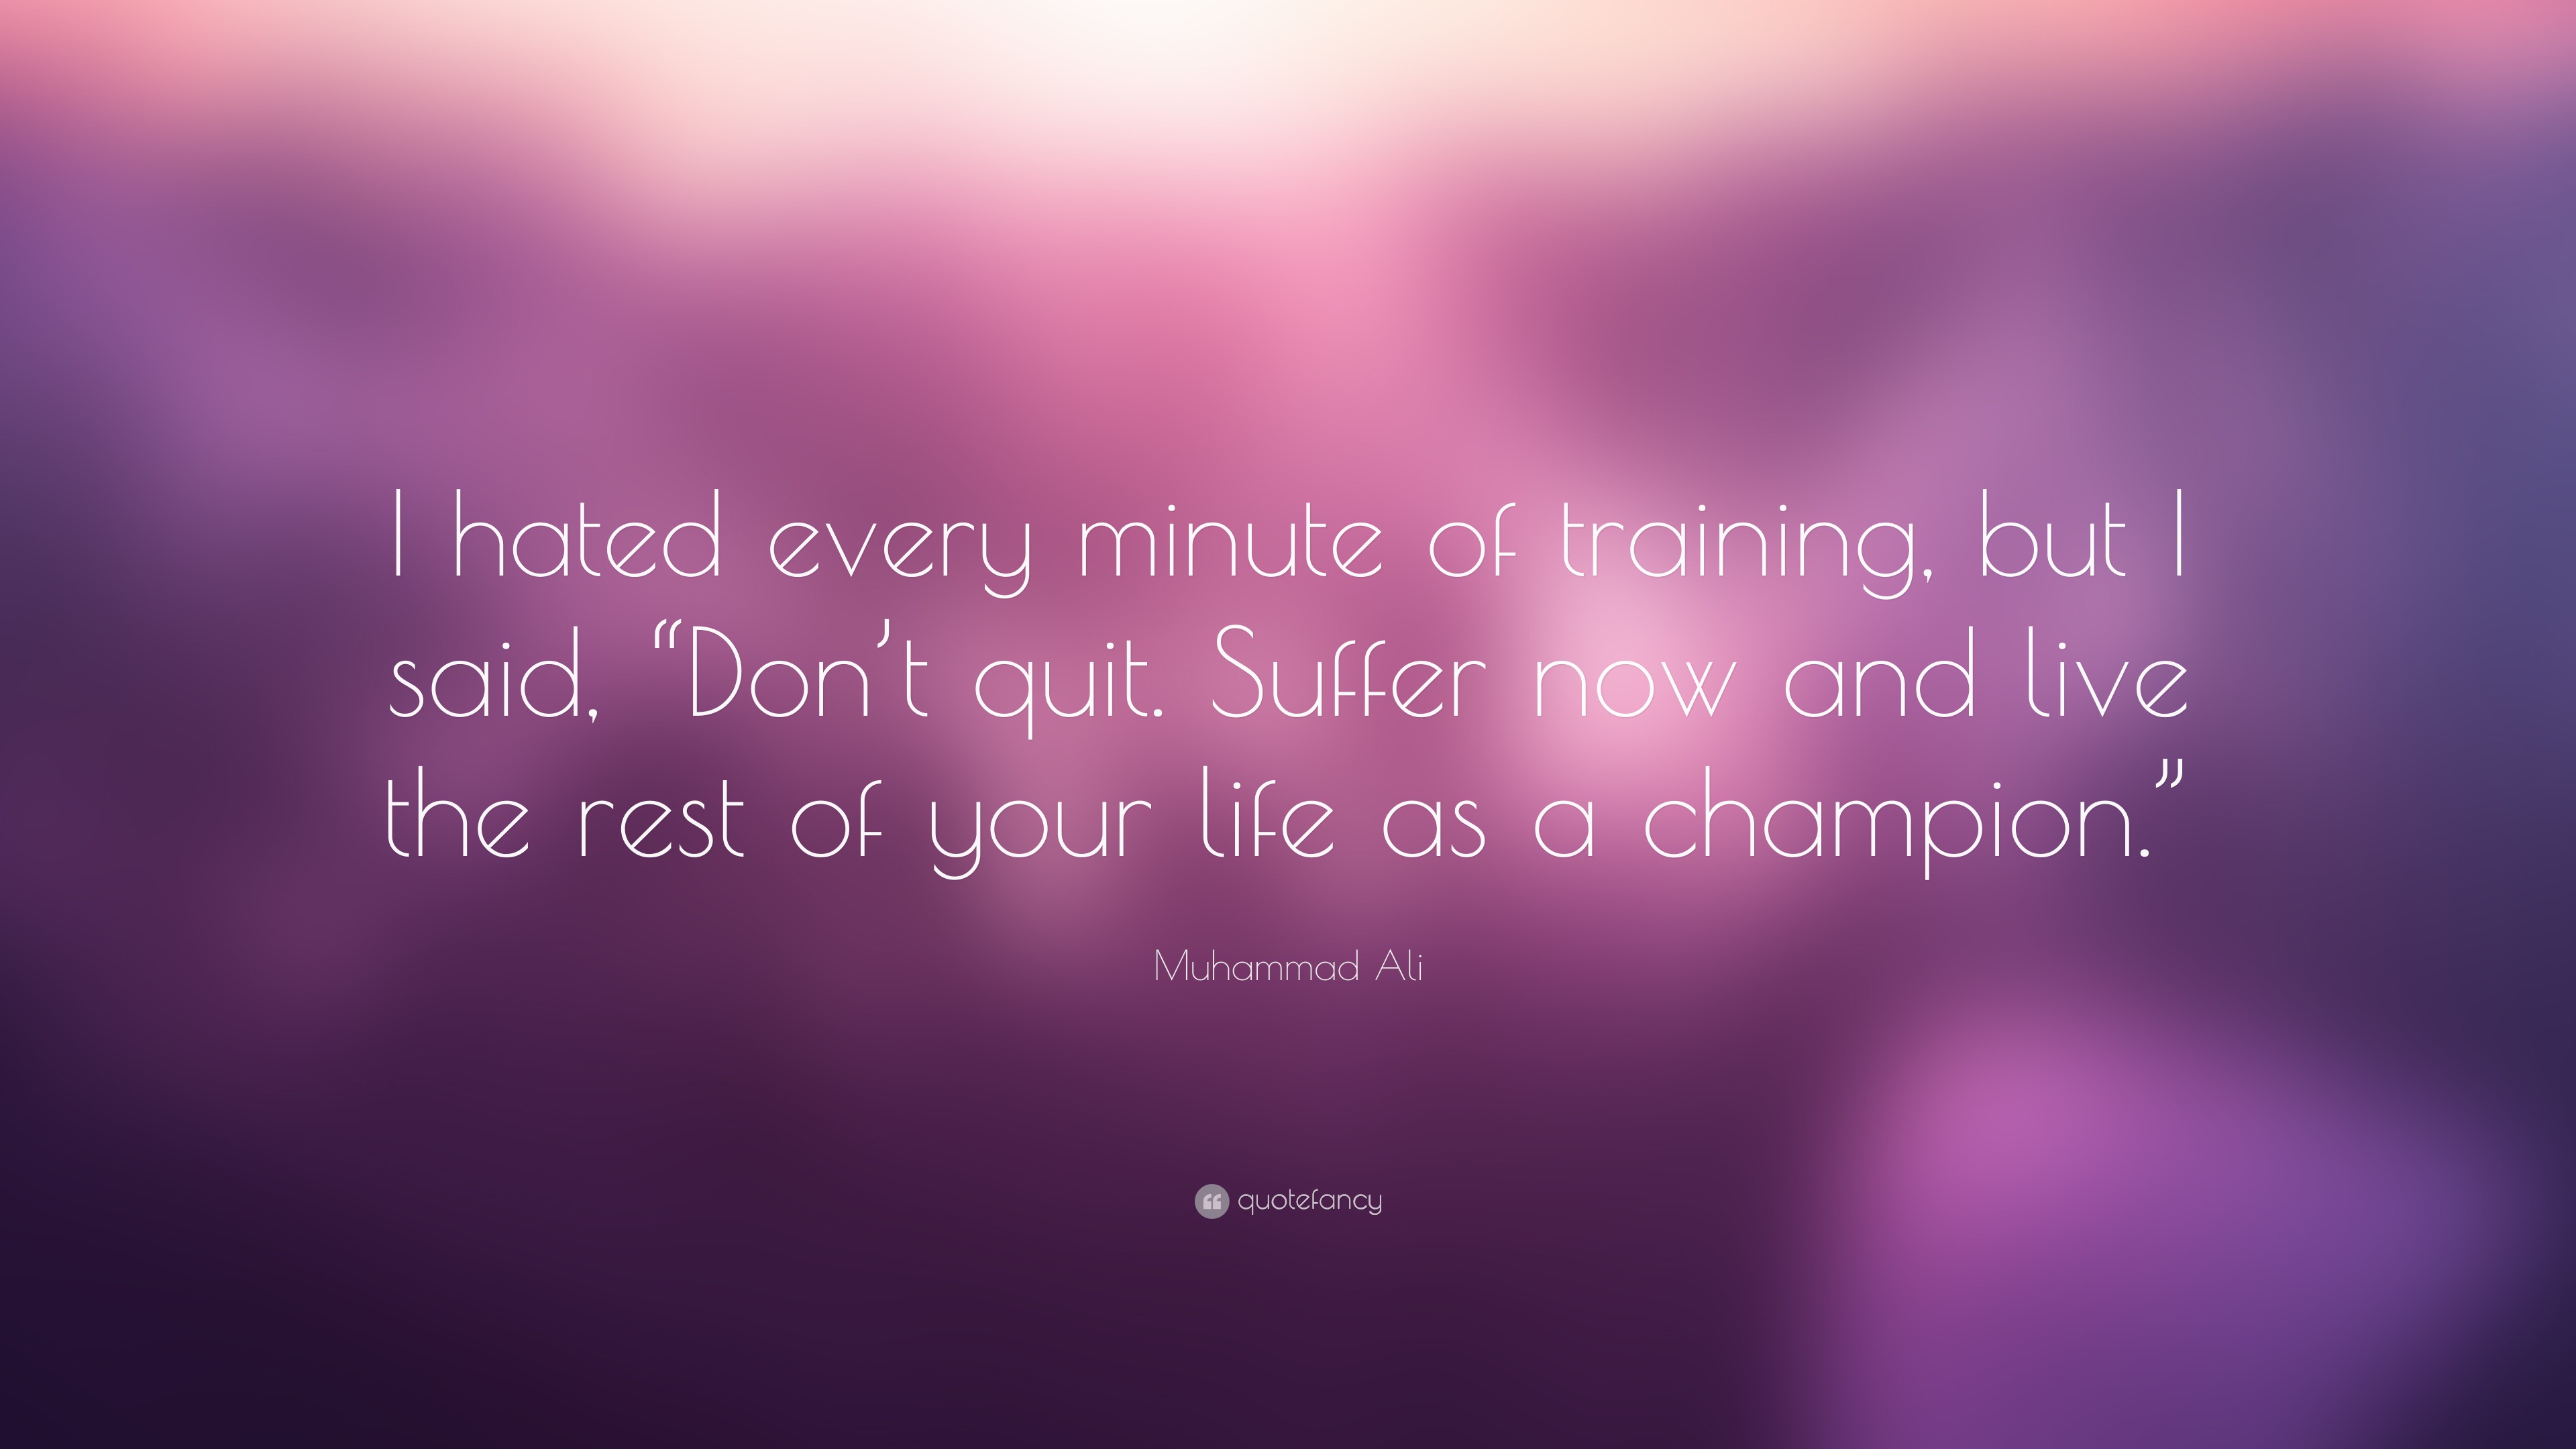 Muhammad Ali Quote: “I hated every minute of training, but I said, “Don't  quit. Suffer